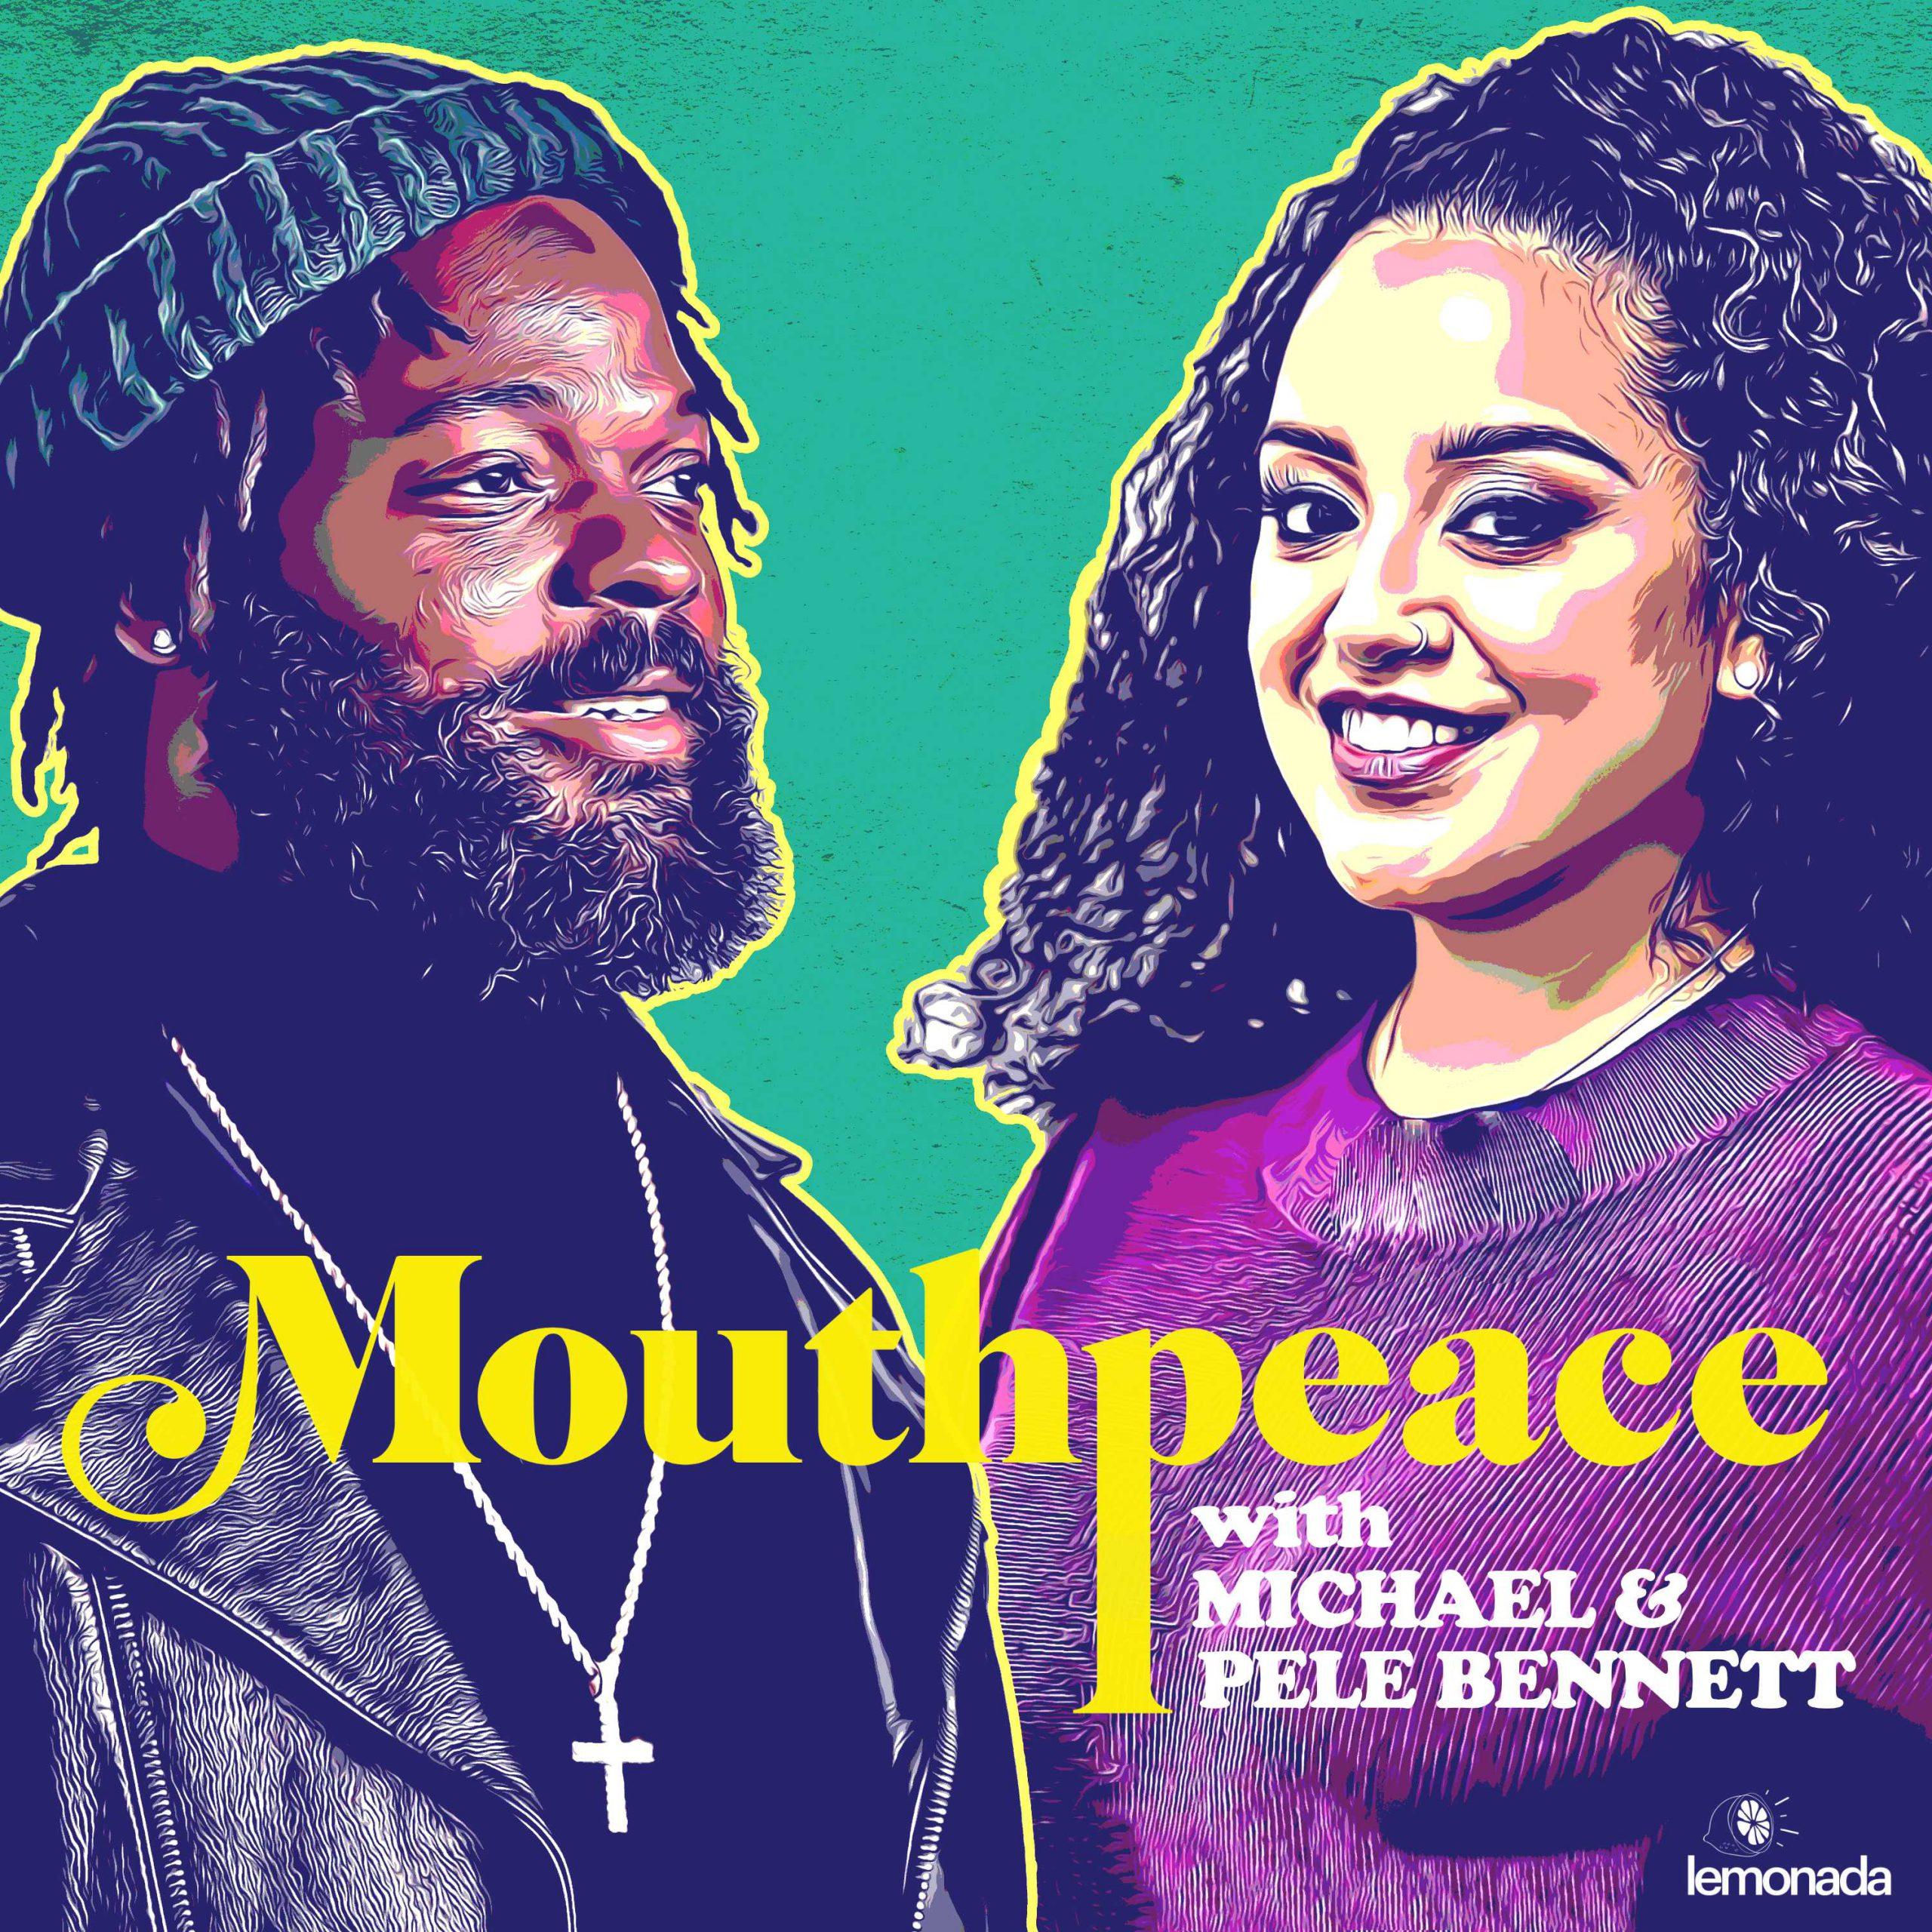 MOUTHPEACE WITH MICHAEL BENNETT AND PELE BENNETT, A NEW PODCAST FROM LEMONADA MEDIA, IS NOW AVAILABLE